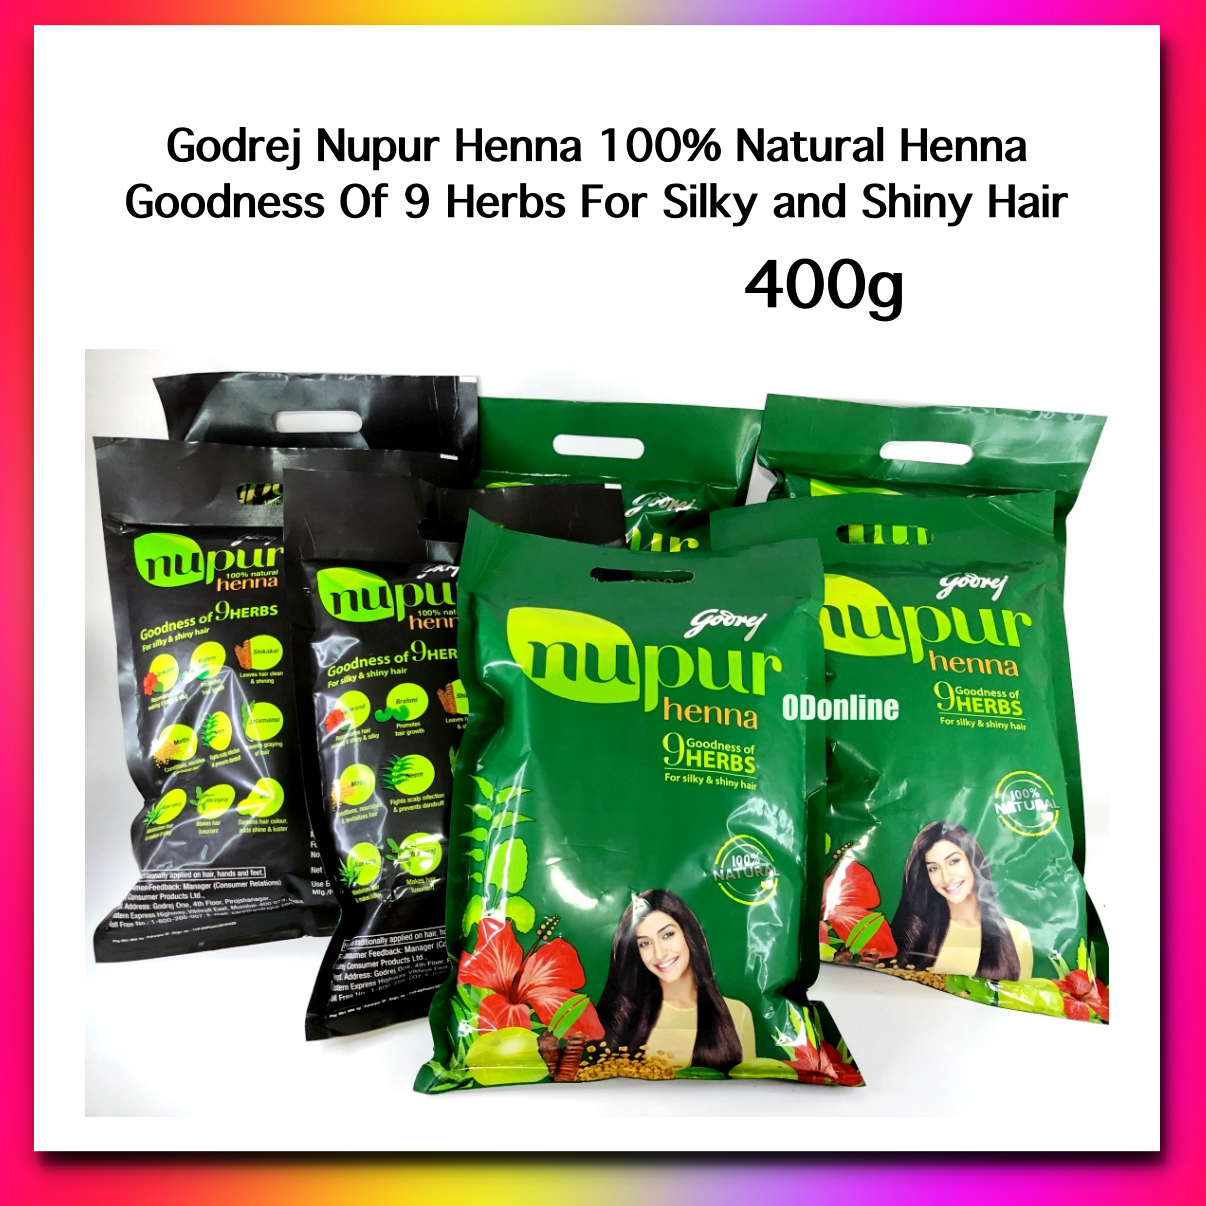 Godrej Nupur Henna 100% Natural Henna Goodness Of 9 Herbs for Silky and  Shiny Hair 400g | Lazada Singapore